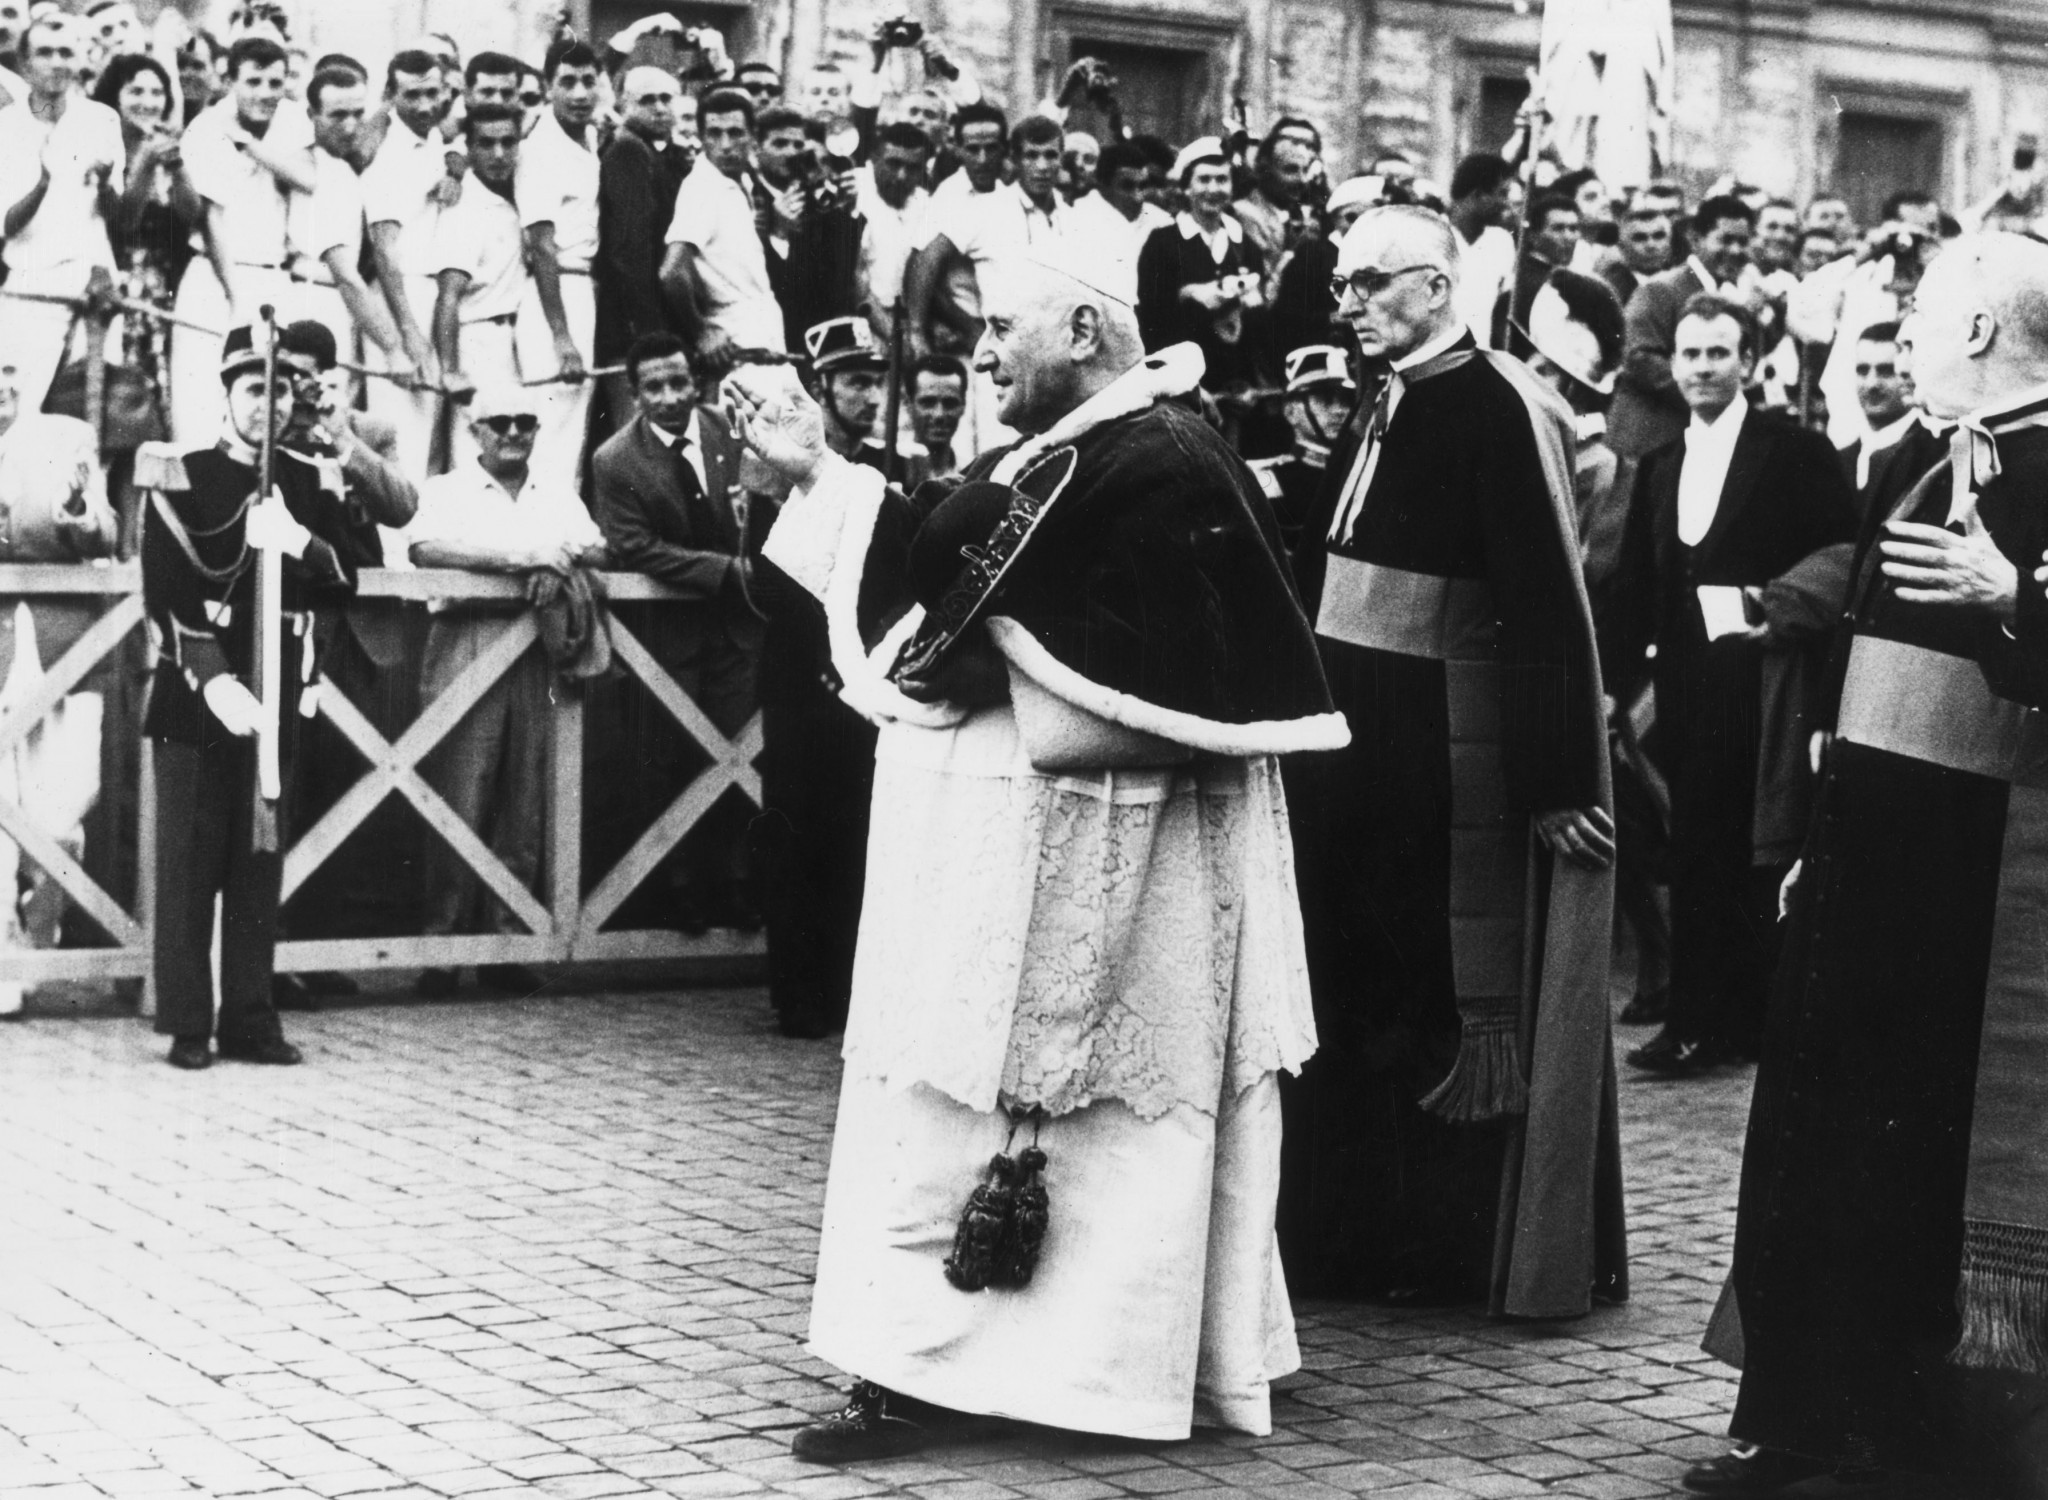 Pope John XXIII held a special audience for participating teams at the Rome 1960 Olympics ©Getty Images